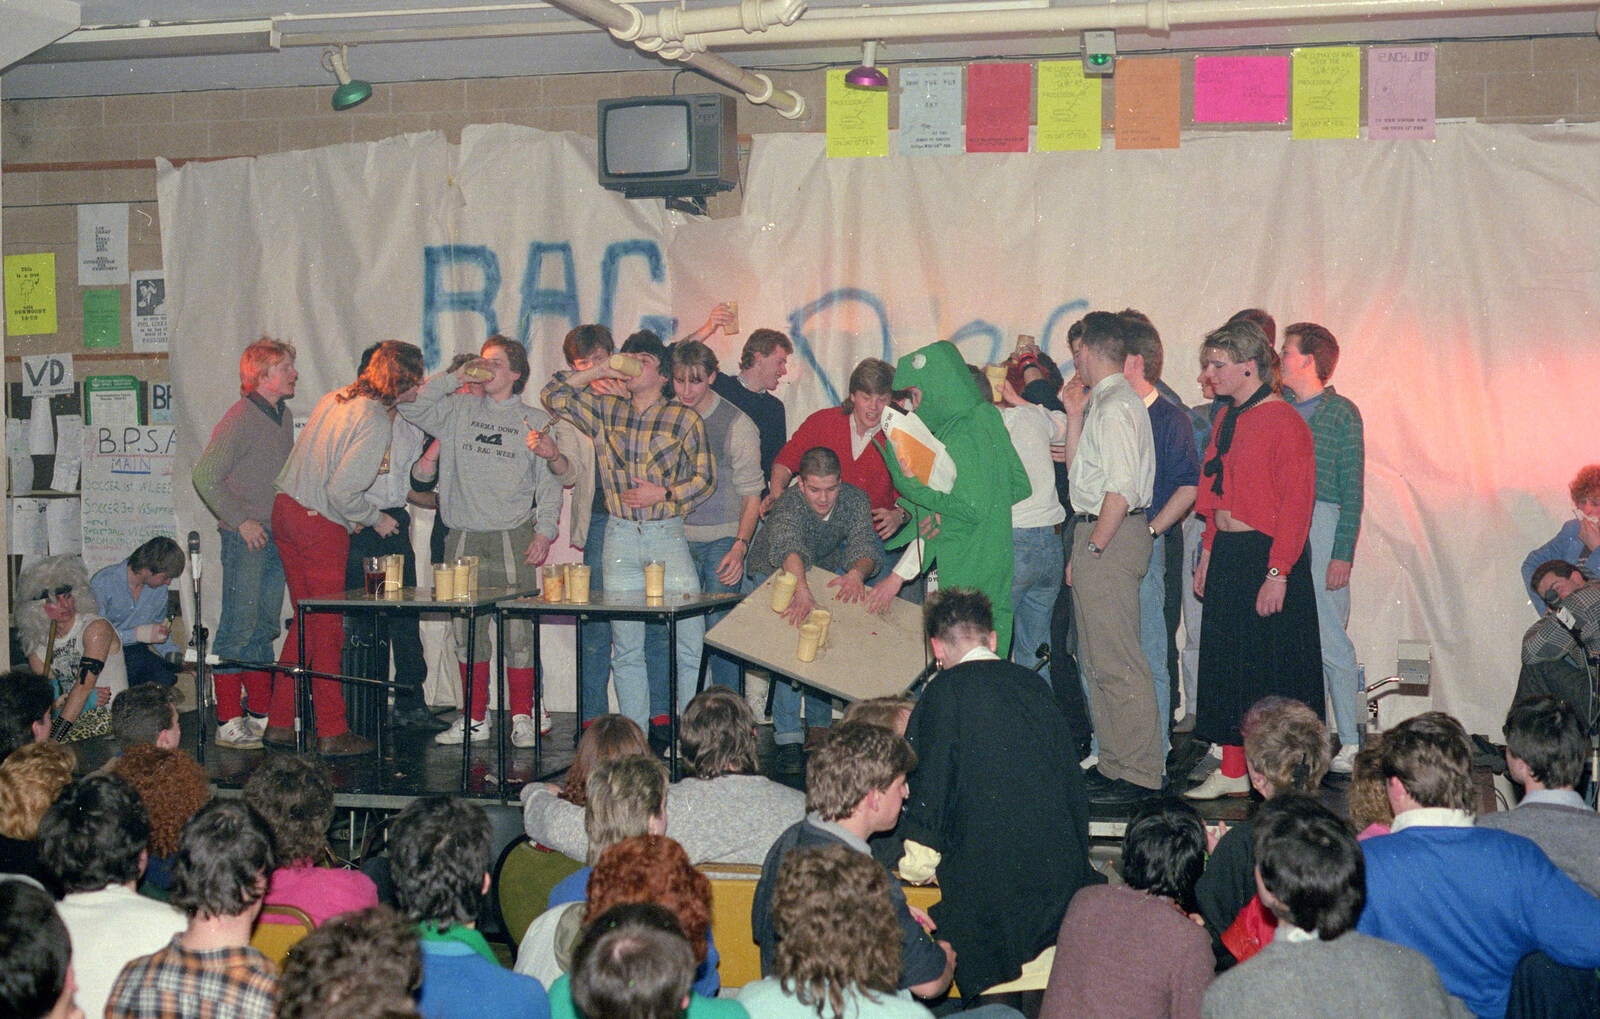 A custard boat race and a falling table from Uni: The PPSU "Jazz" RAG Review and Charity Auction, Plymouth, Devon - 19th February 1986